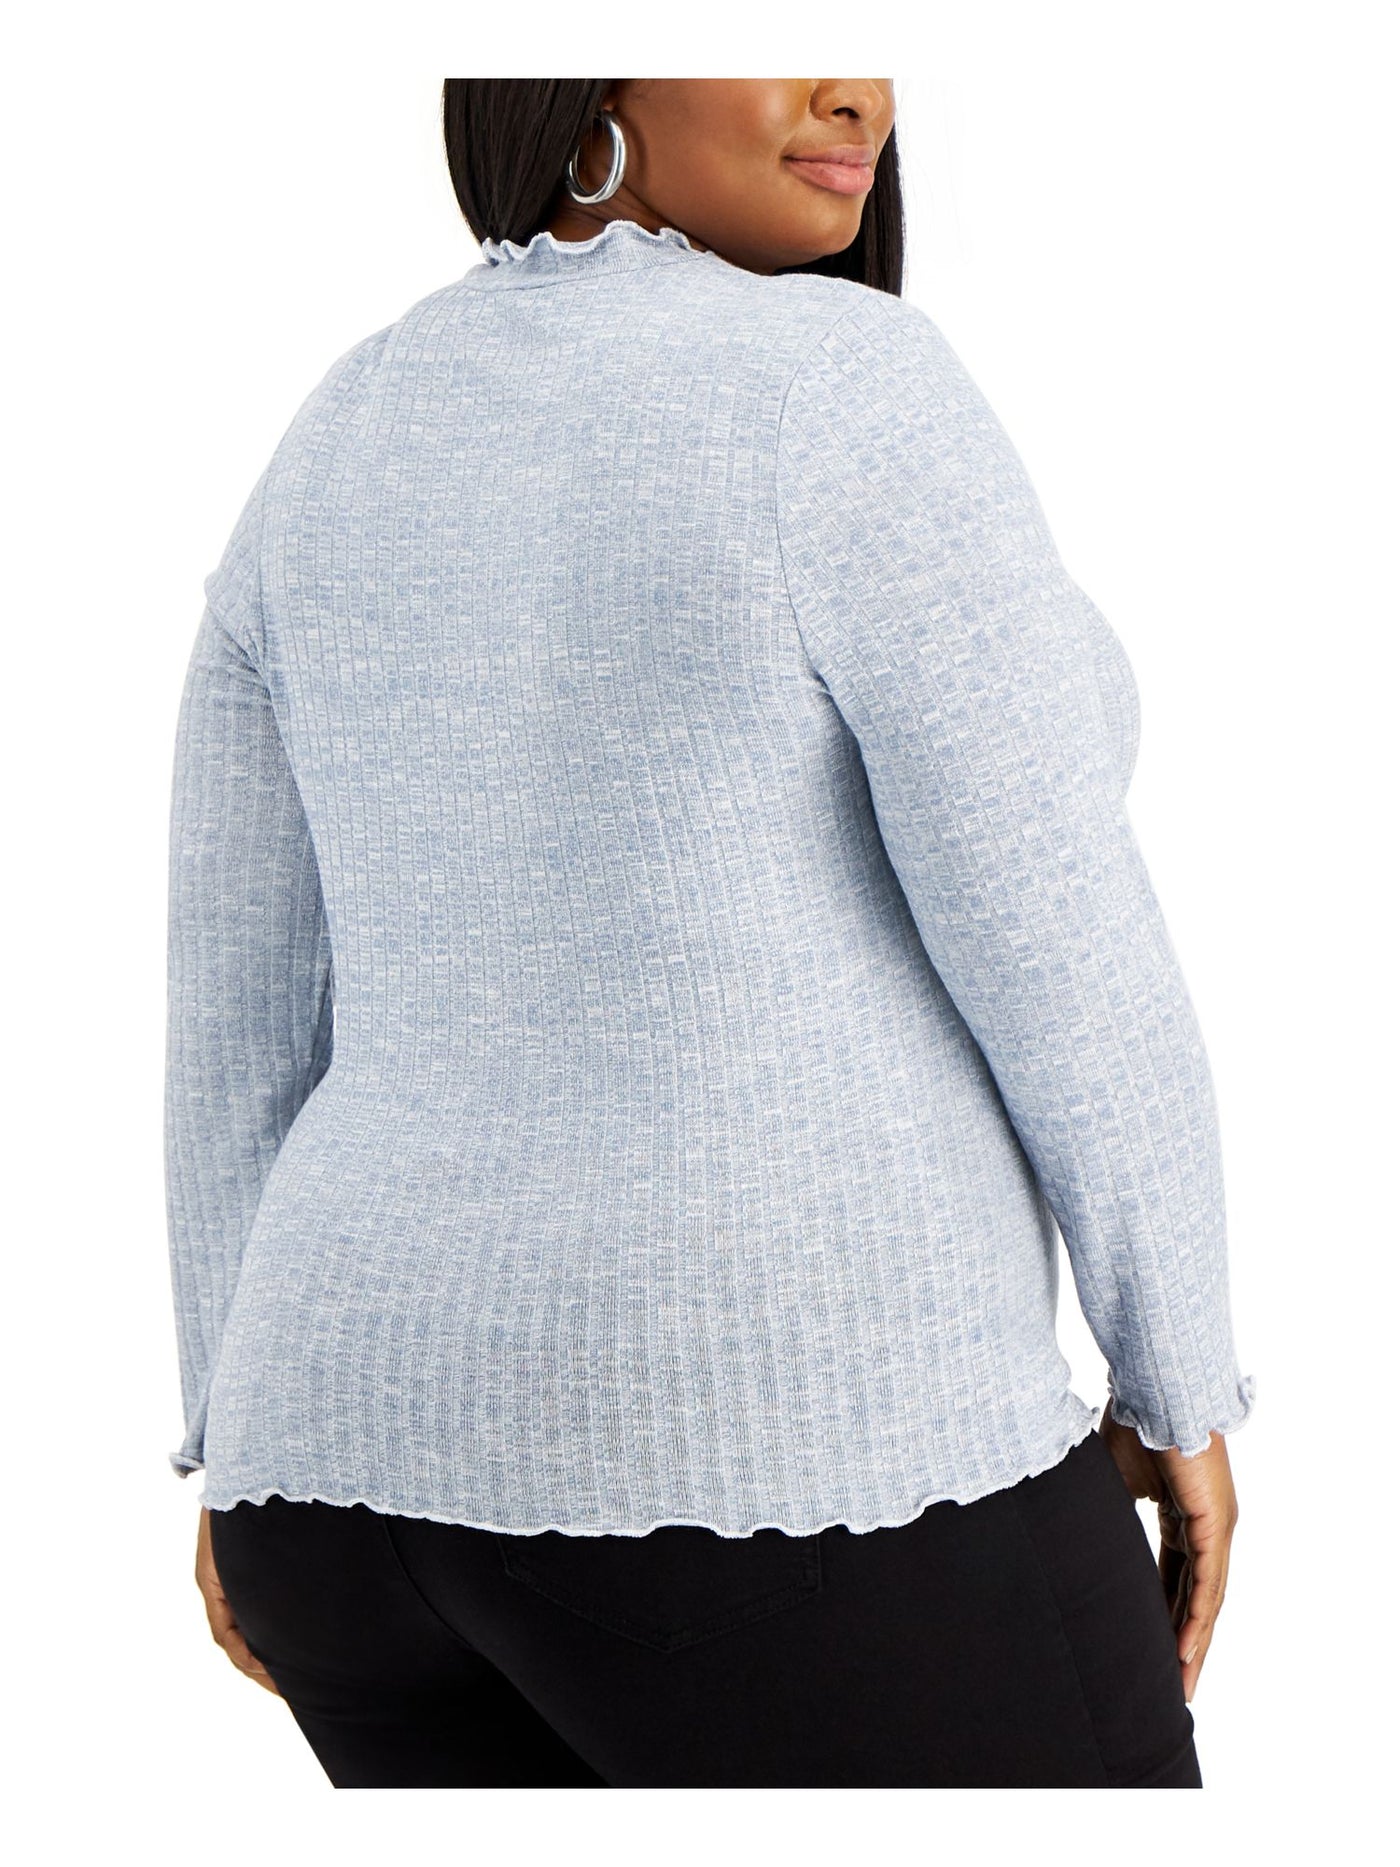 REBELLIOUS ONE Womens Light Blue Stretch Ribbed Scalloped Long Sleeve Turtle Neck Sweater Plus 1X